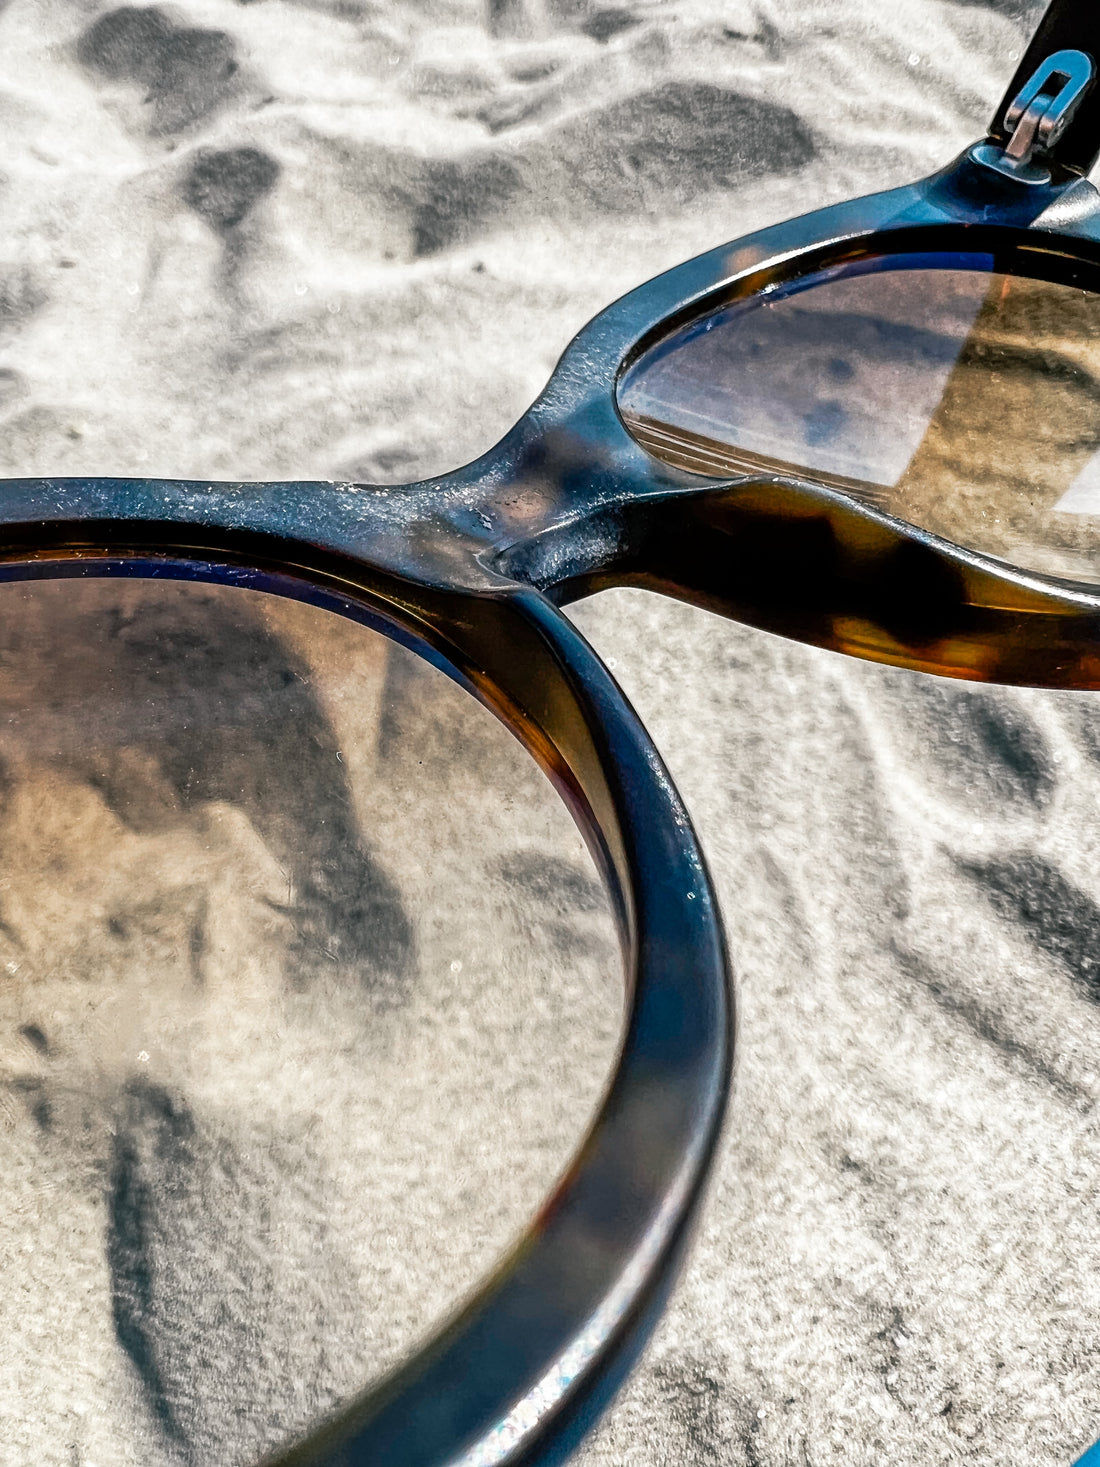 a image of very dirty, stained and smeared glasses at the beach in summer, sunglasses